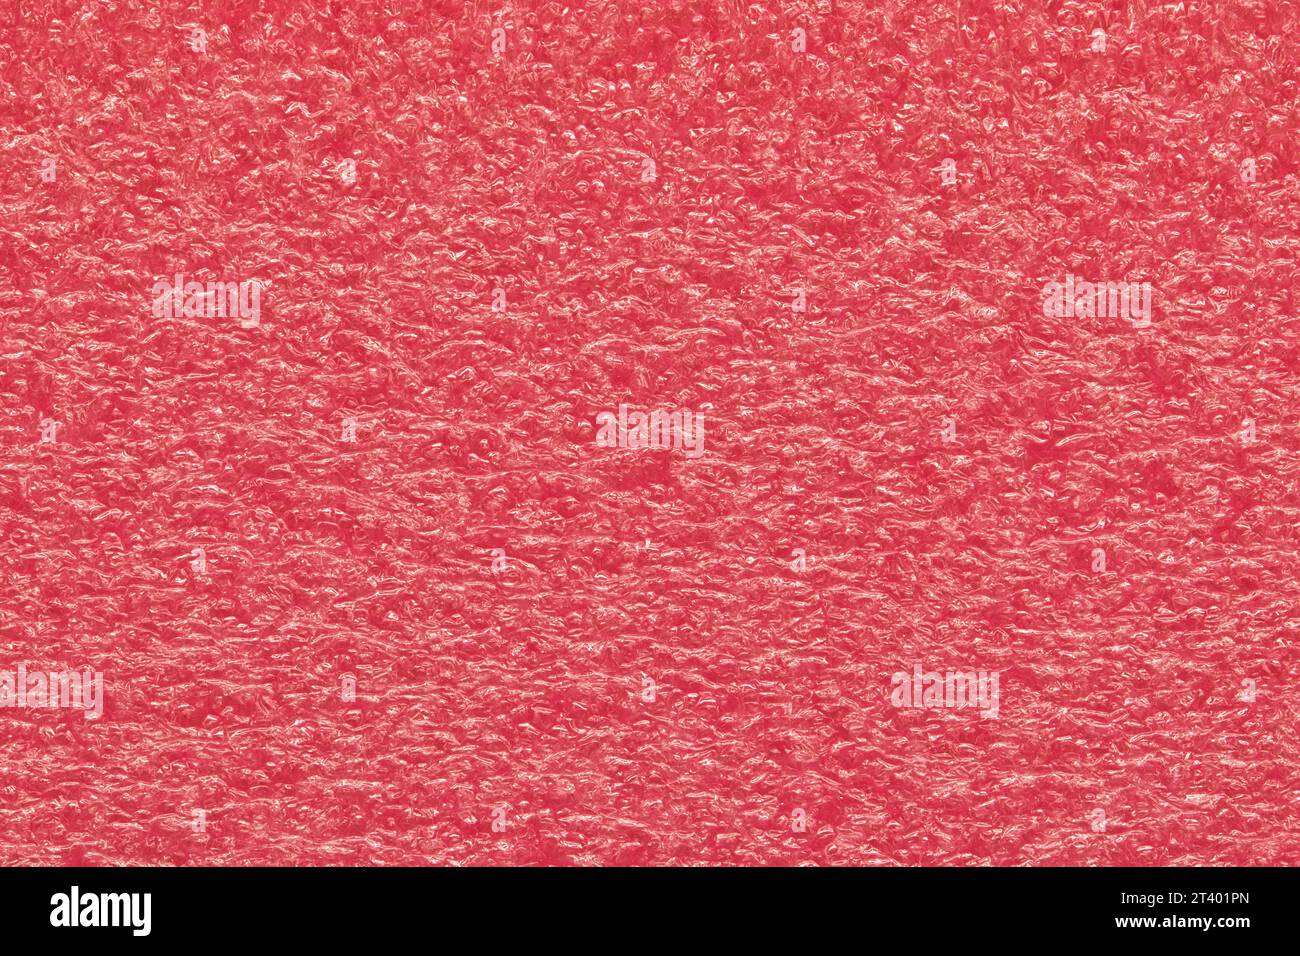 Melon pink expanded polyethylene foam sample background. EPE beads packing material with macro details, textures and one solid color. Stock Photo